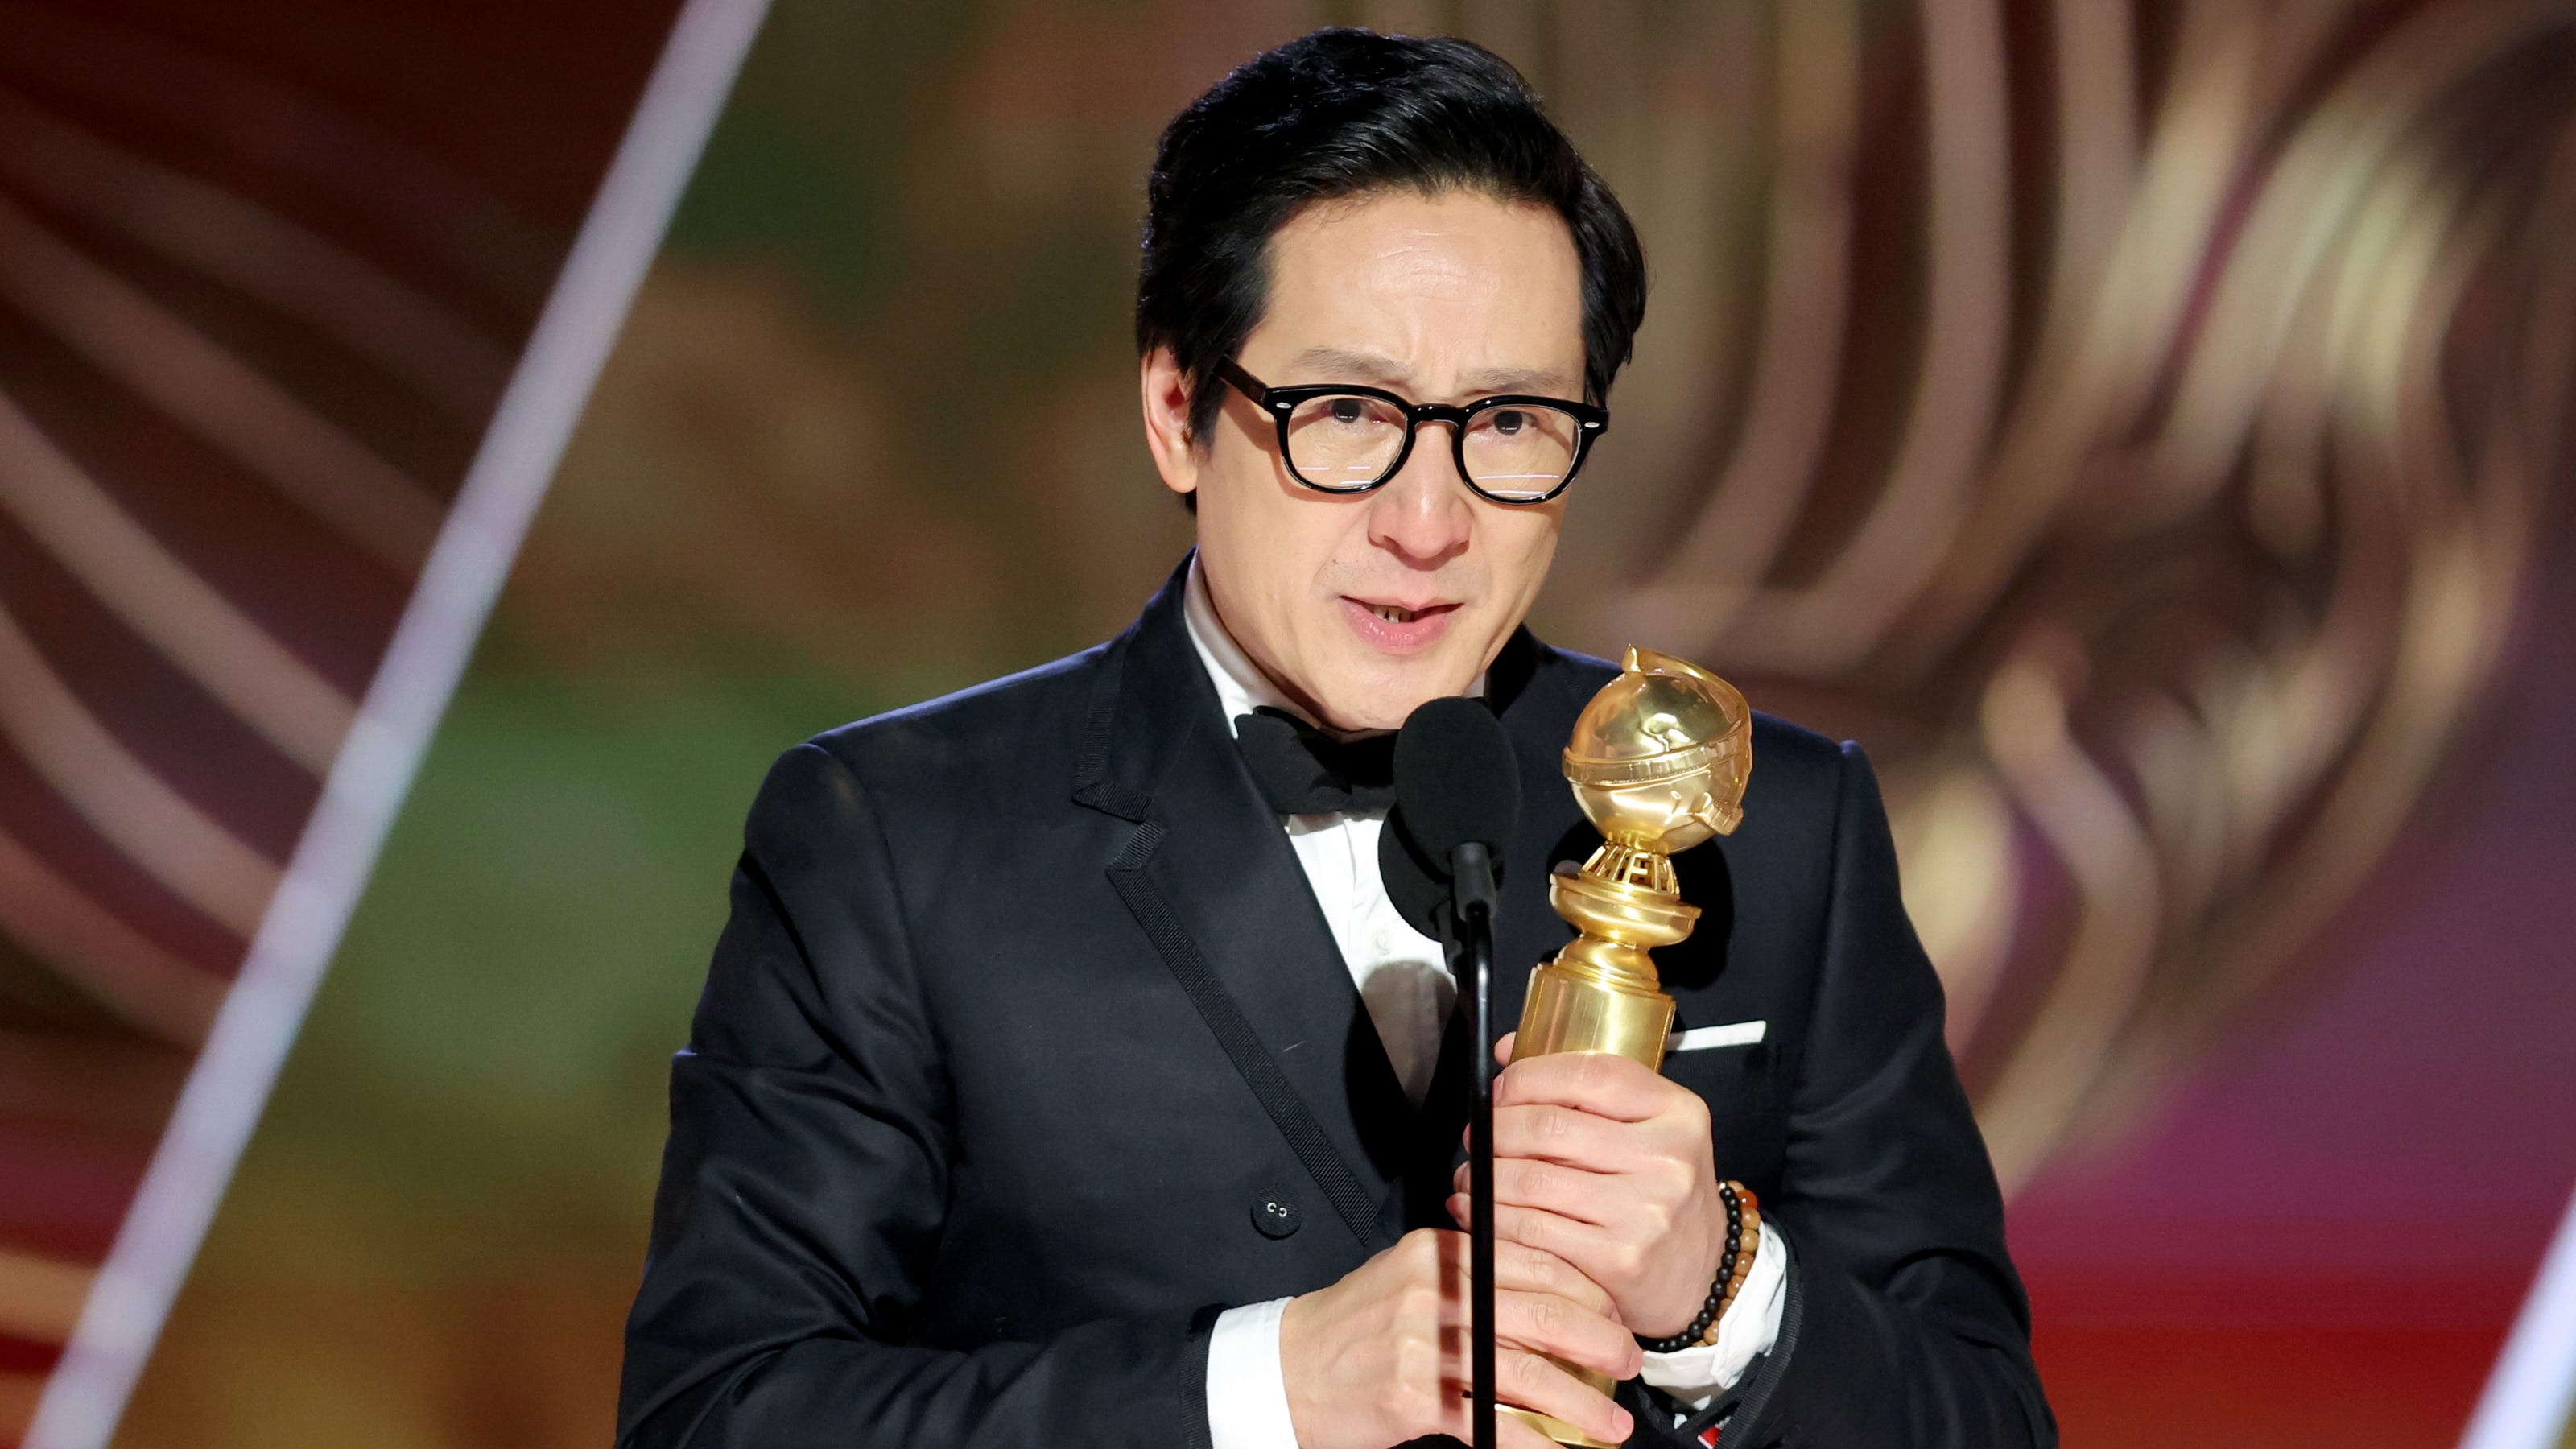 'Everything Everywhere All at Once' star Ke Huy Quan breaks down in tears at Golden Globes win